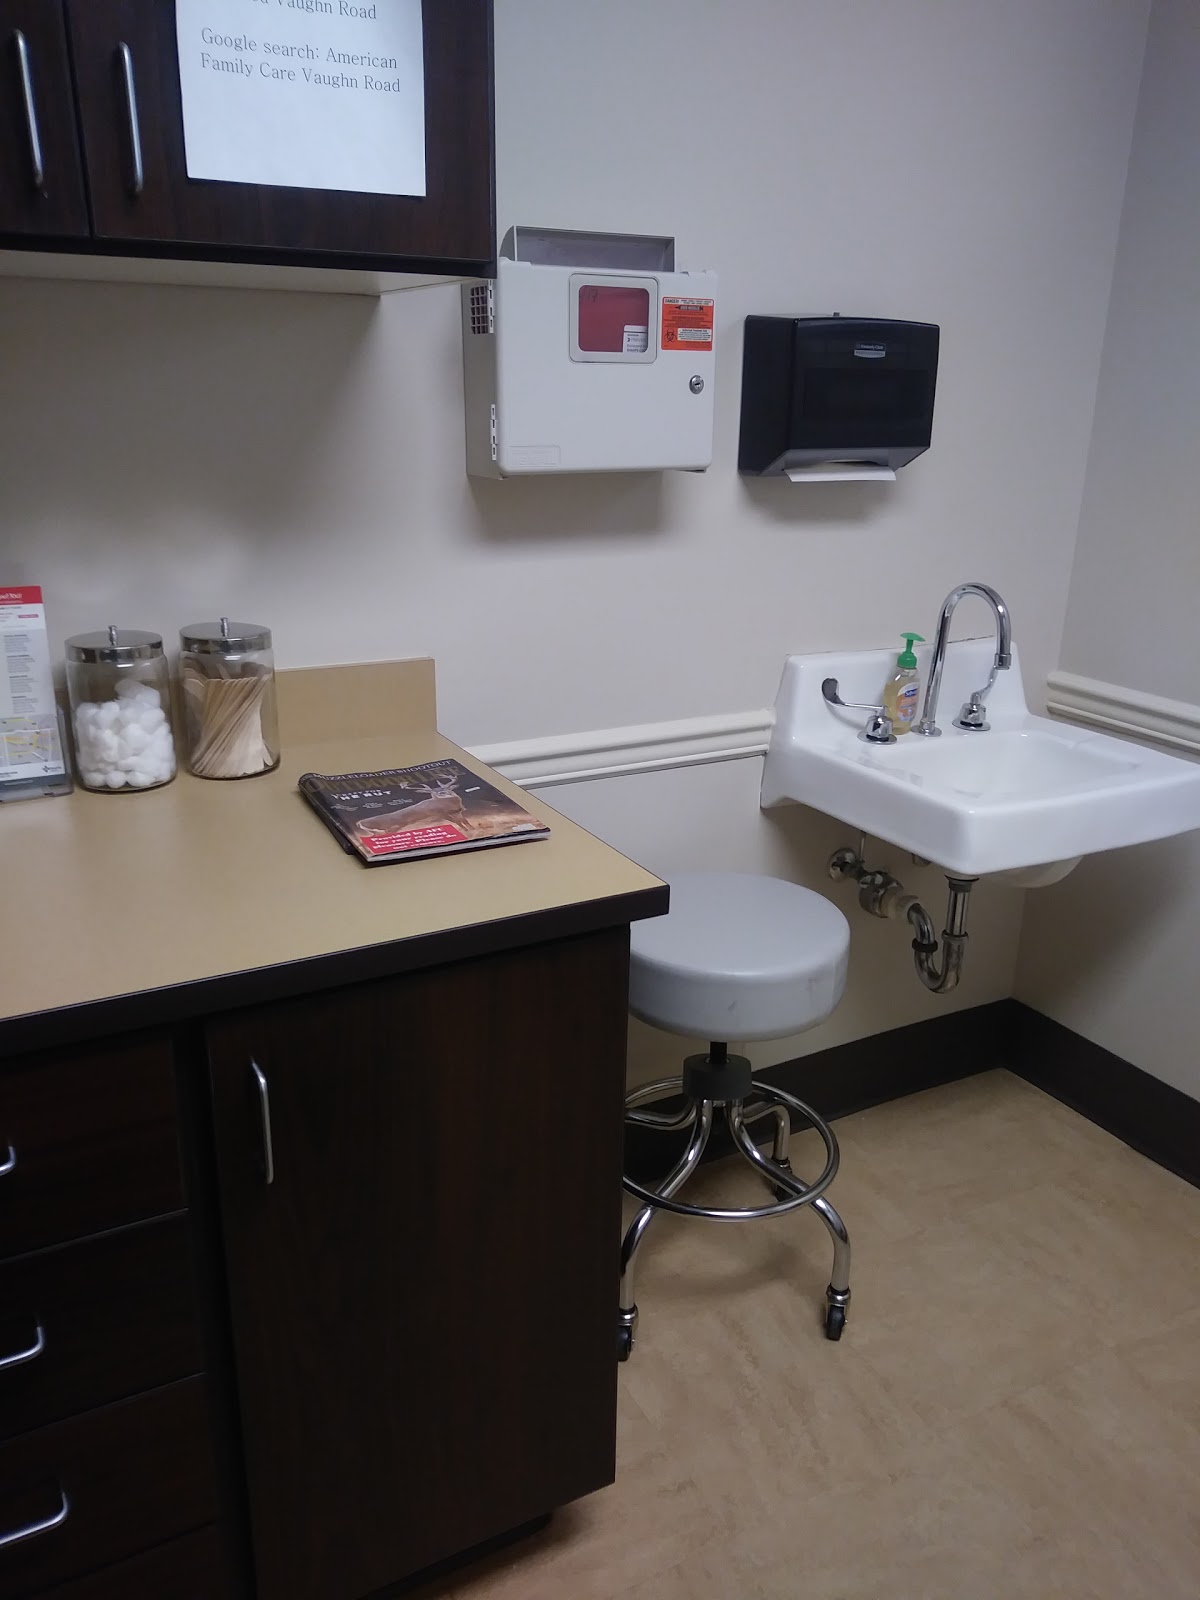 Photo of AFC Urgent Care Vaughn Road COVID Testing at 2815 Eastern Blvd, Montgomery, AL 36116, USA